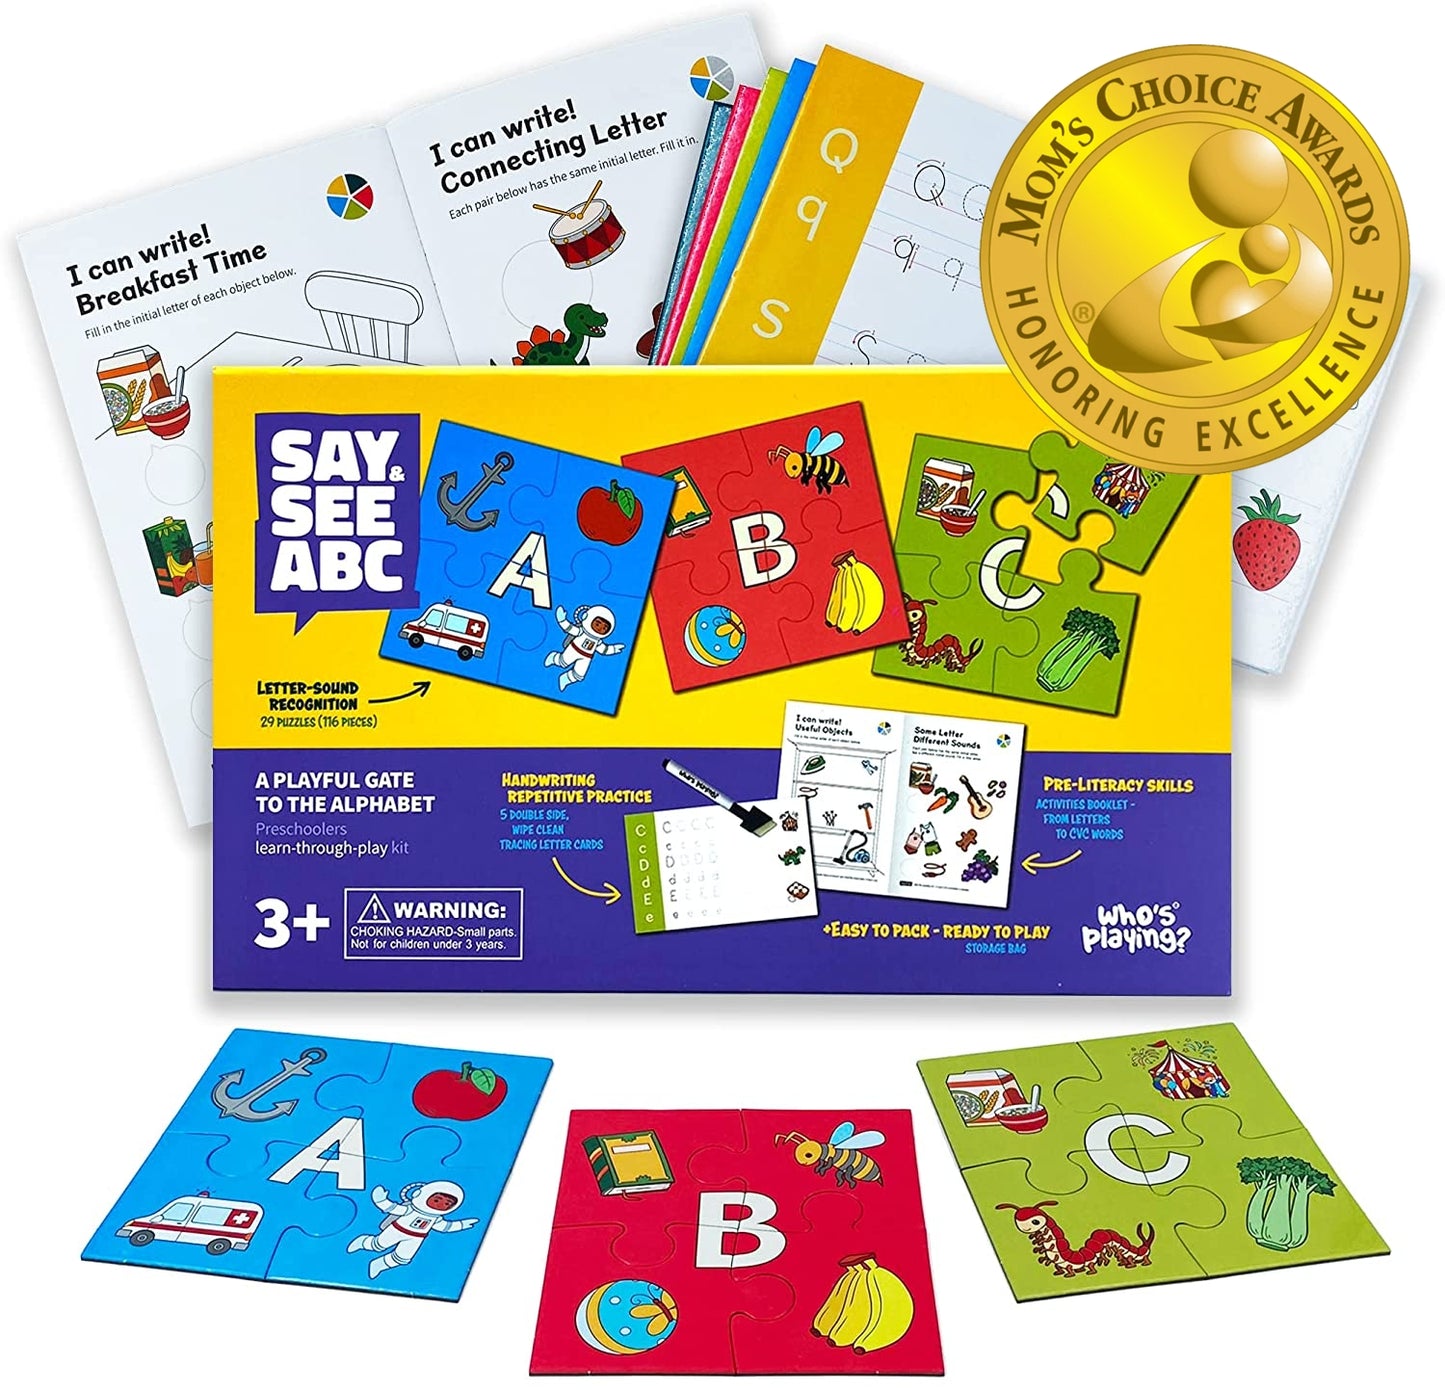 Say & See ABC Letter Sound and CVC Words Phonics Games for Kindergarteners & Homeschool